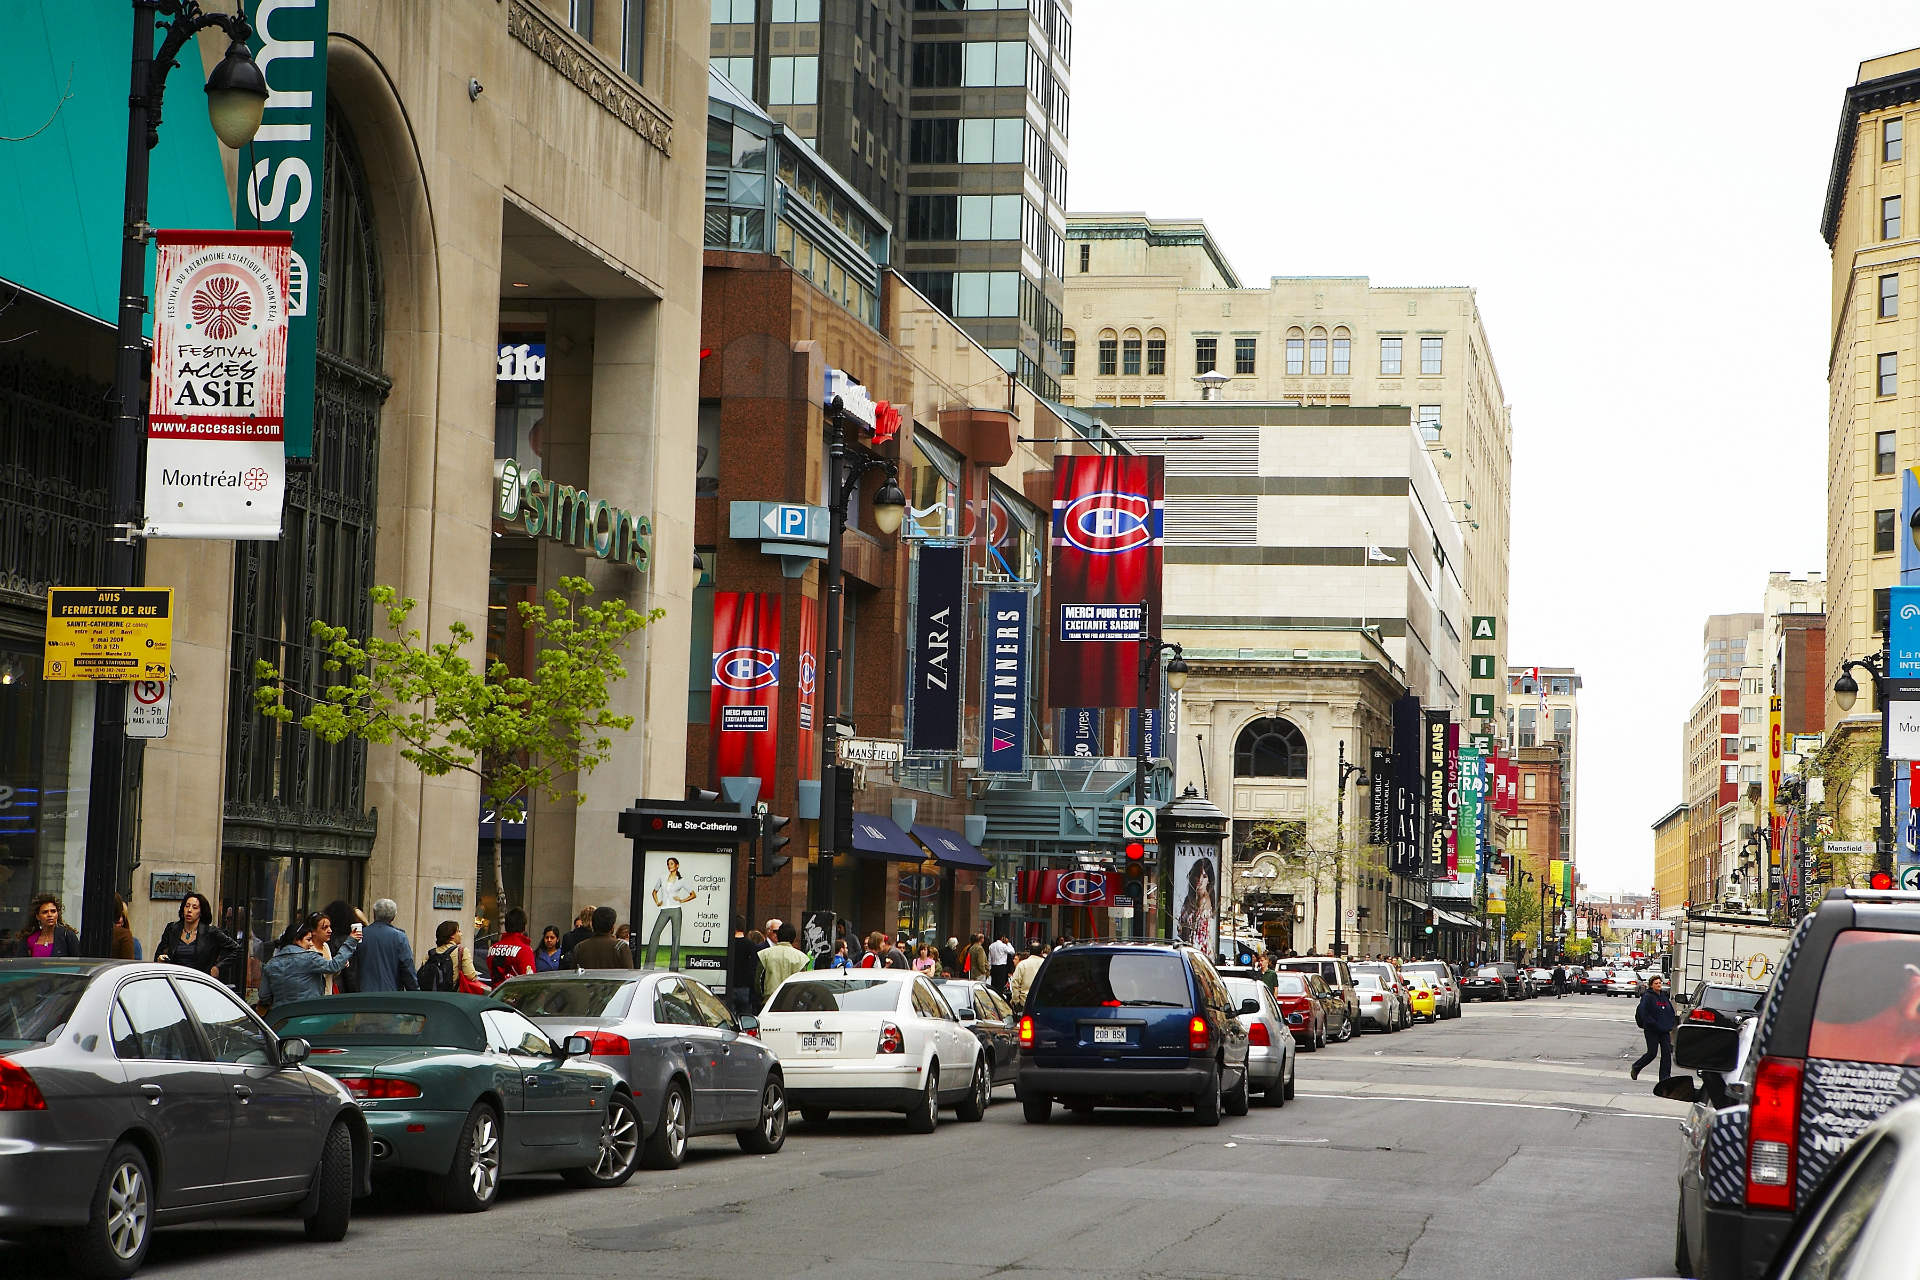 Downtown Montreal Hotels near Shopping